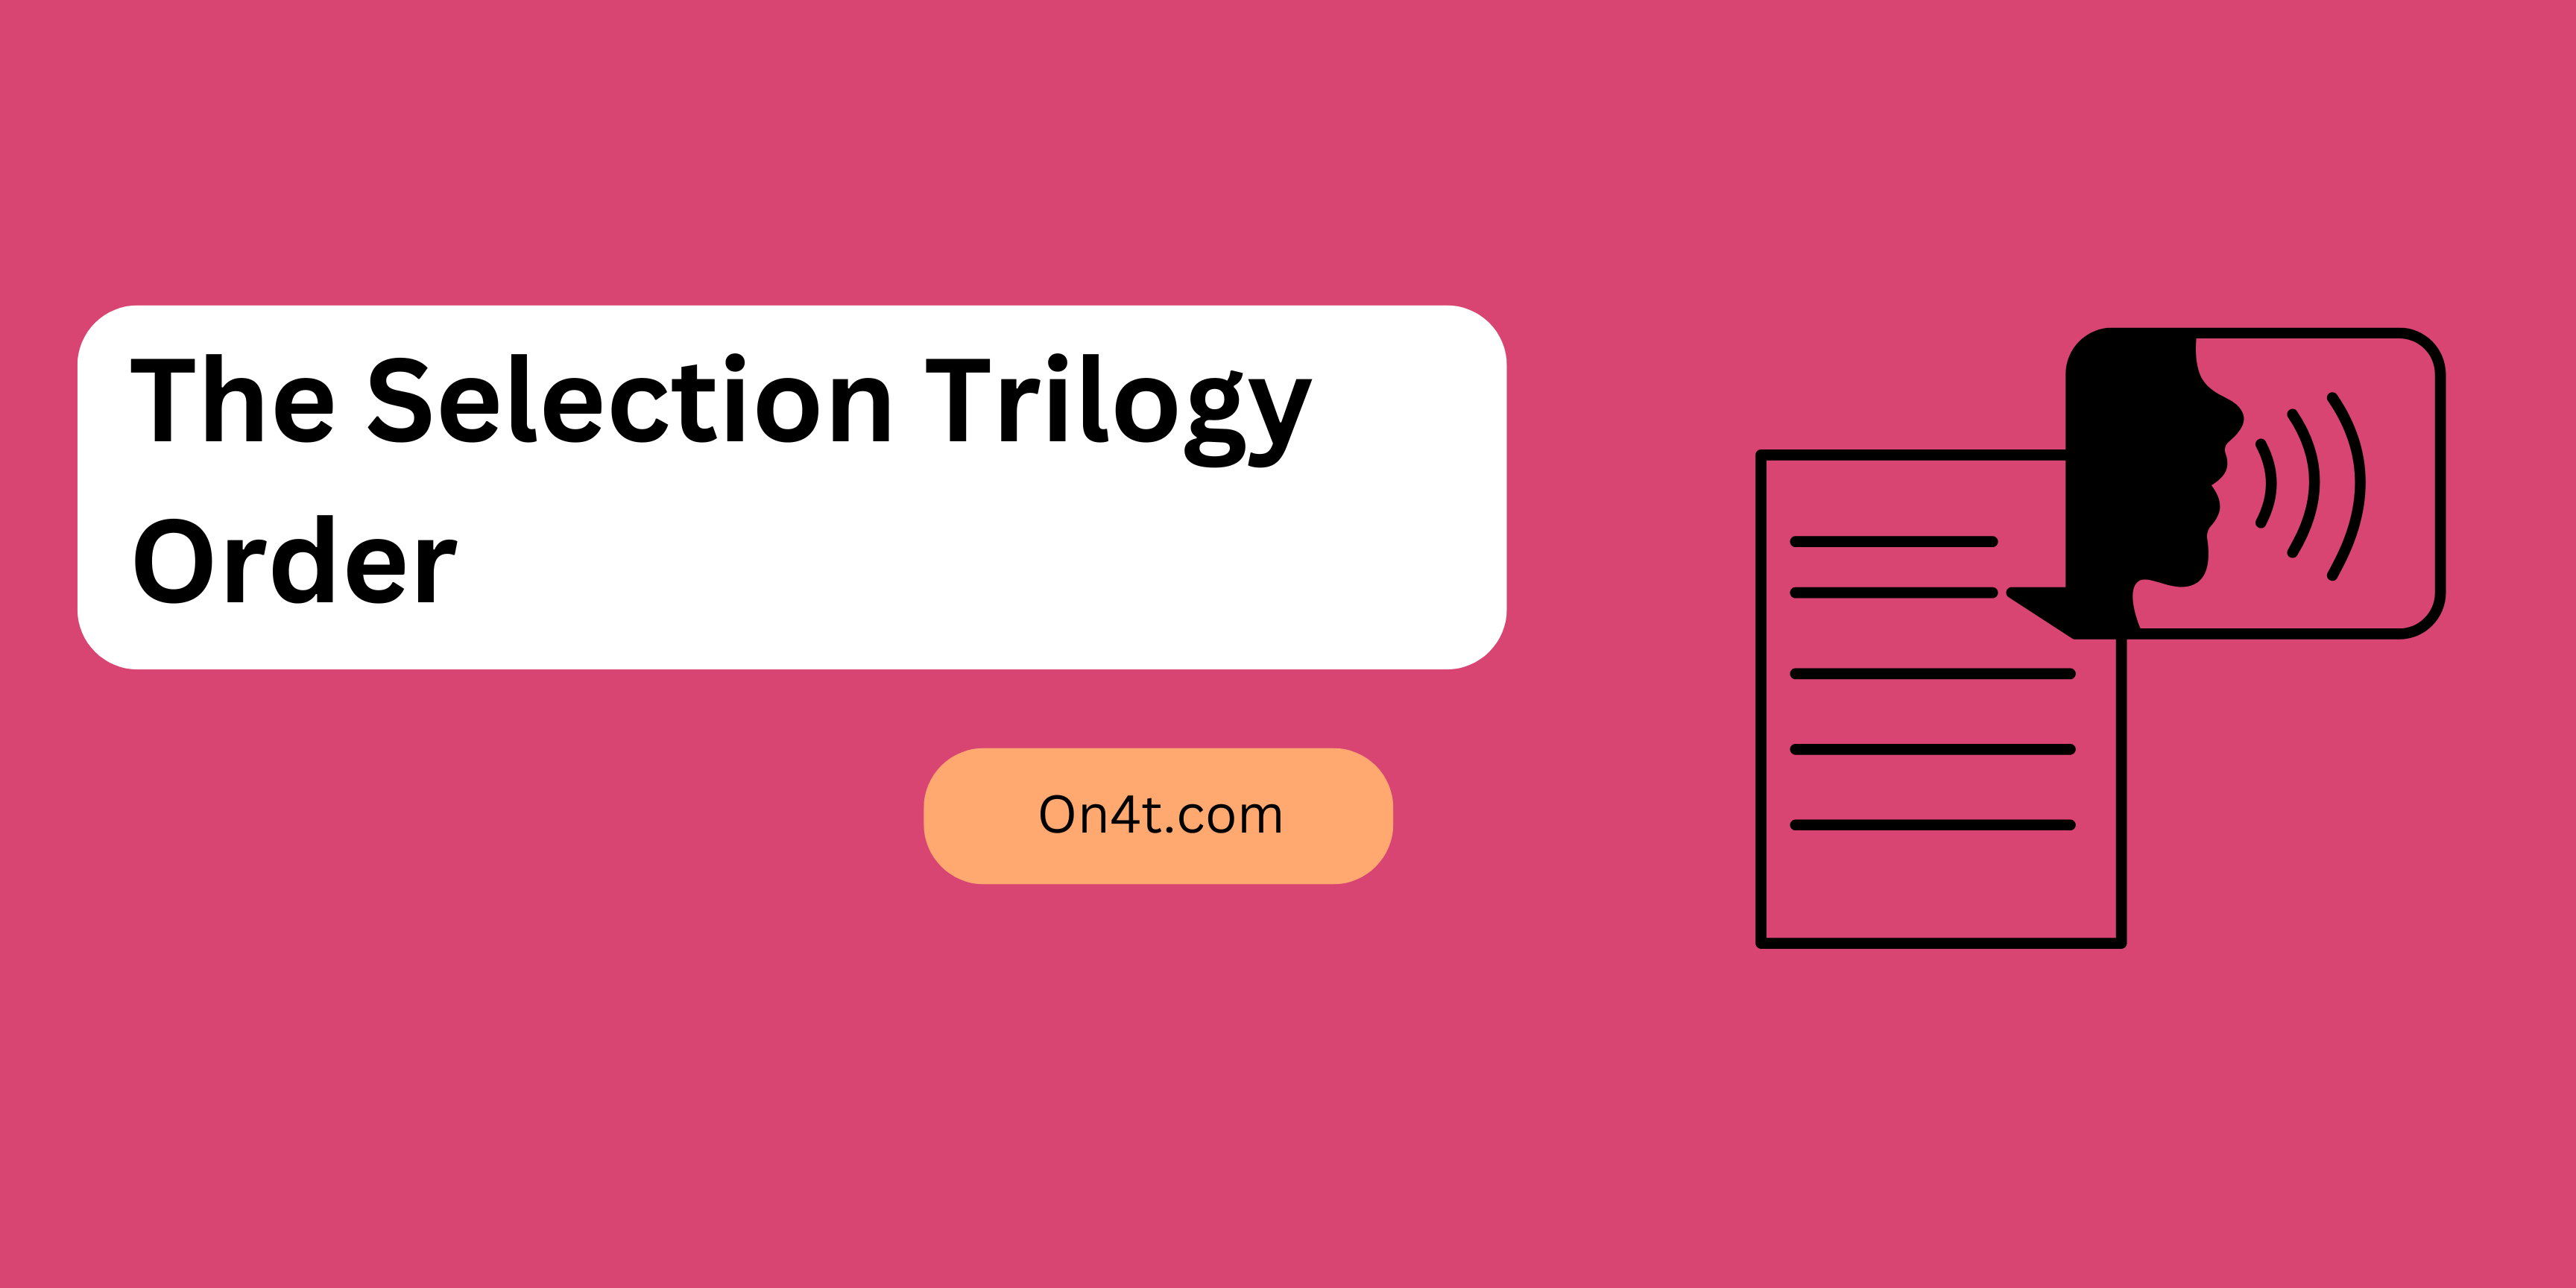 The Selection Trilogy Order